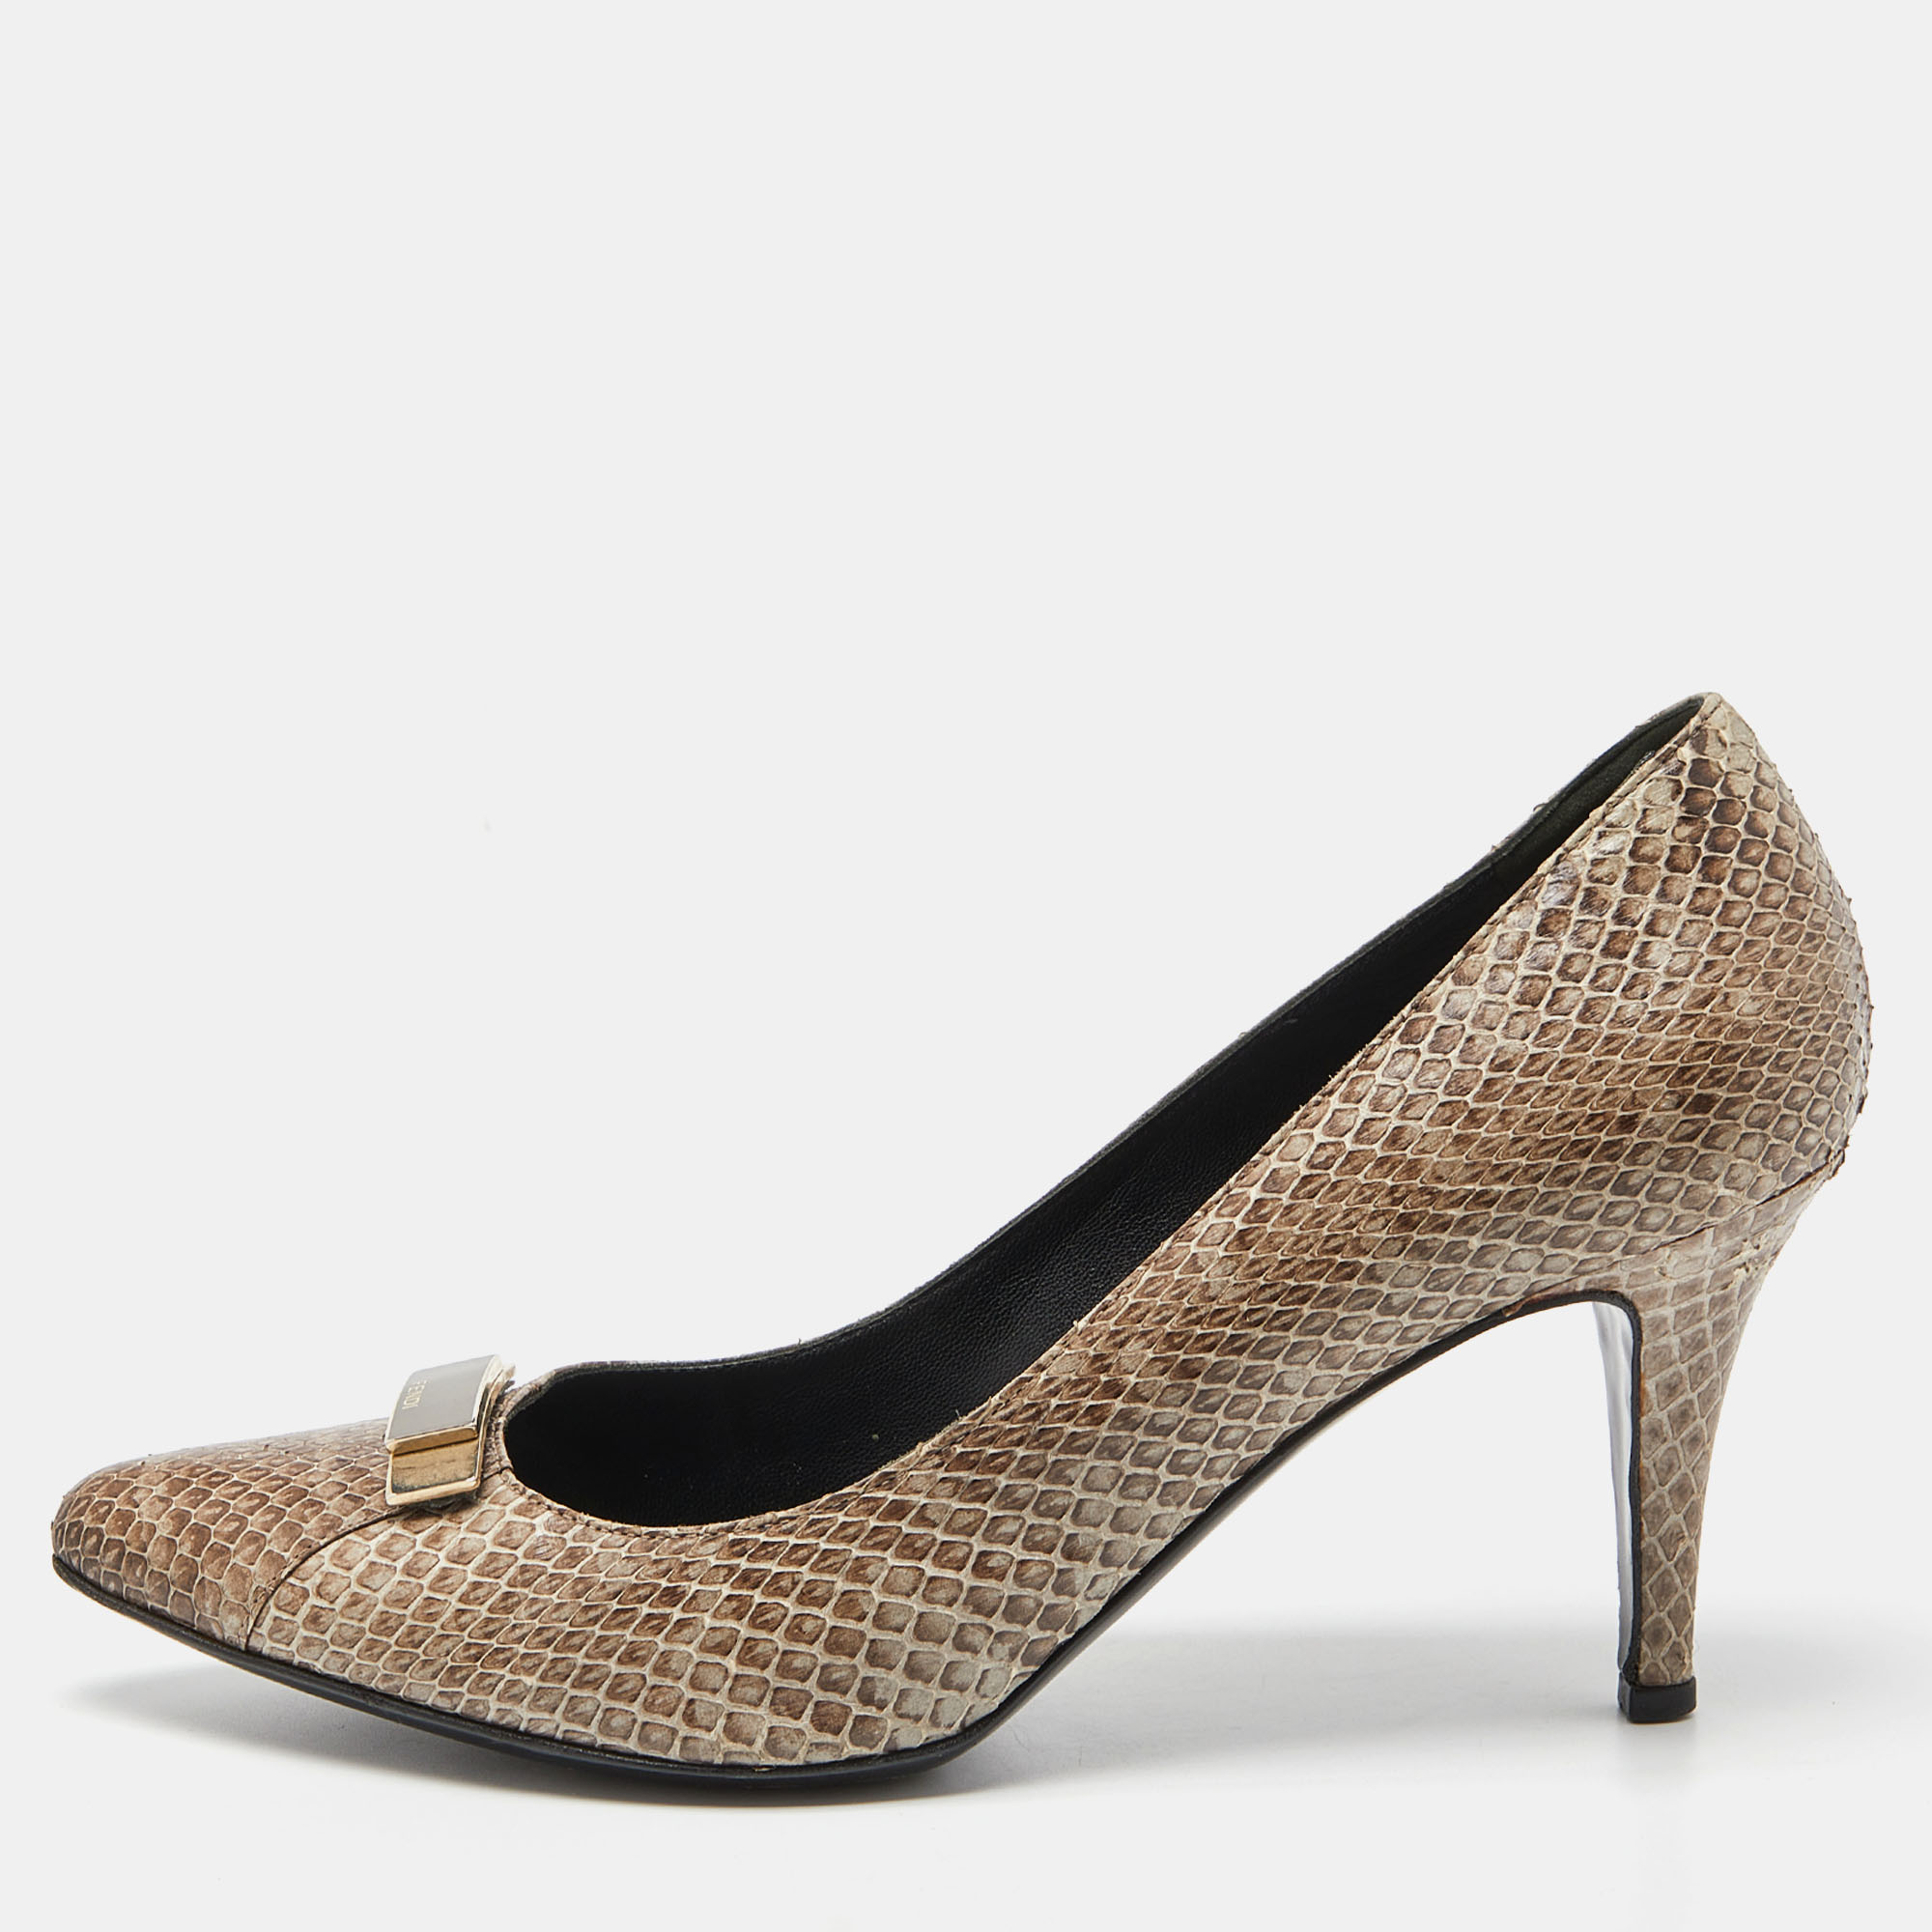 Fendi Beige/Brown Watersnake Leather Pointed Toe Pumps Size 39.5